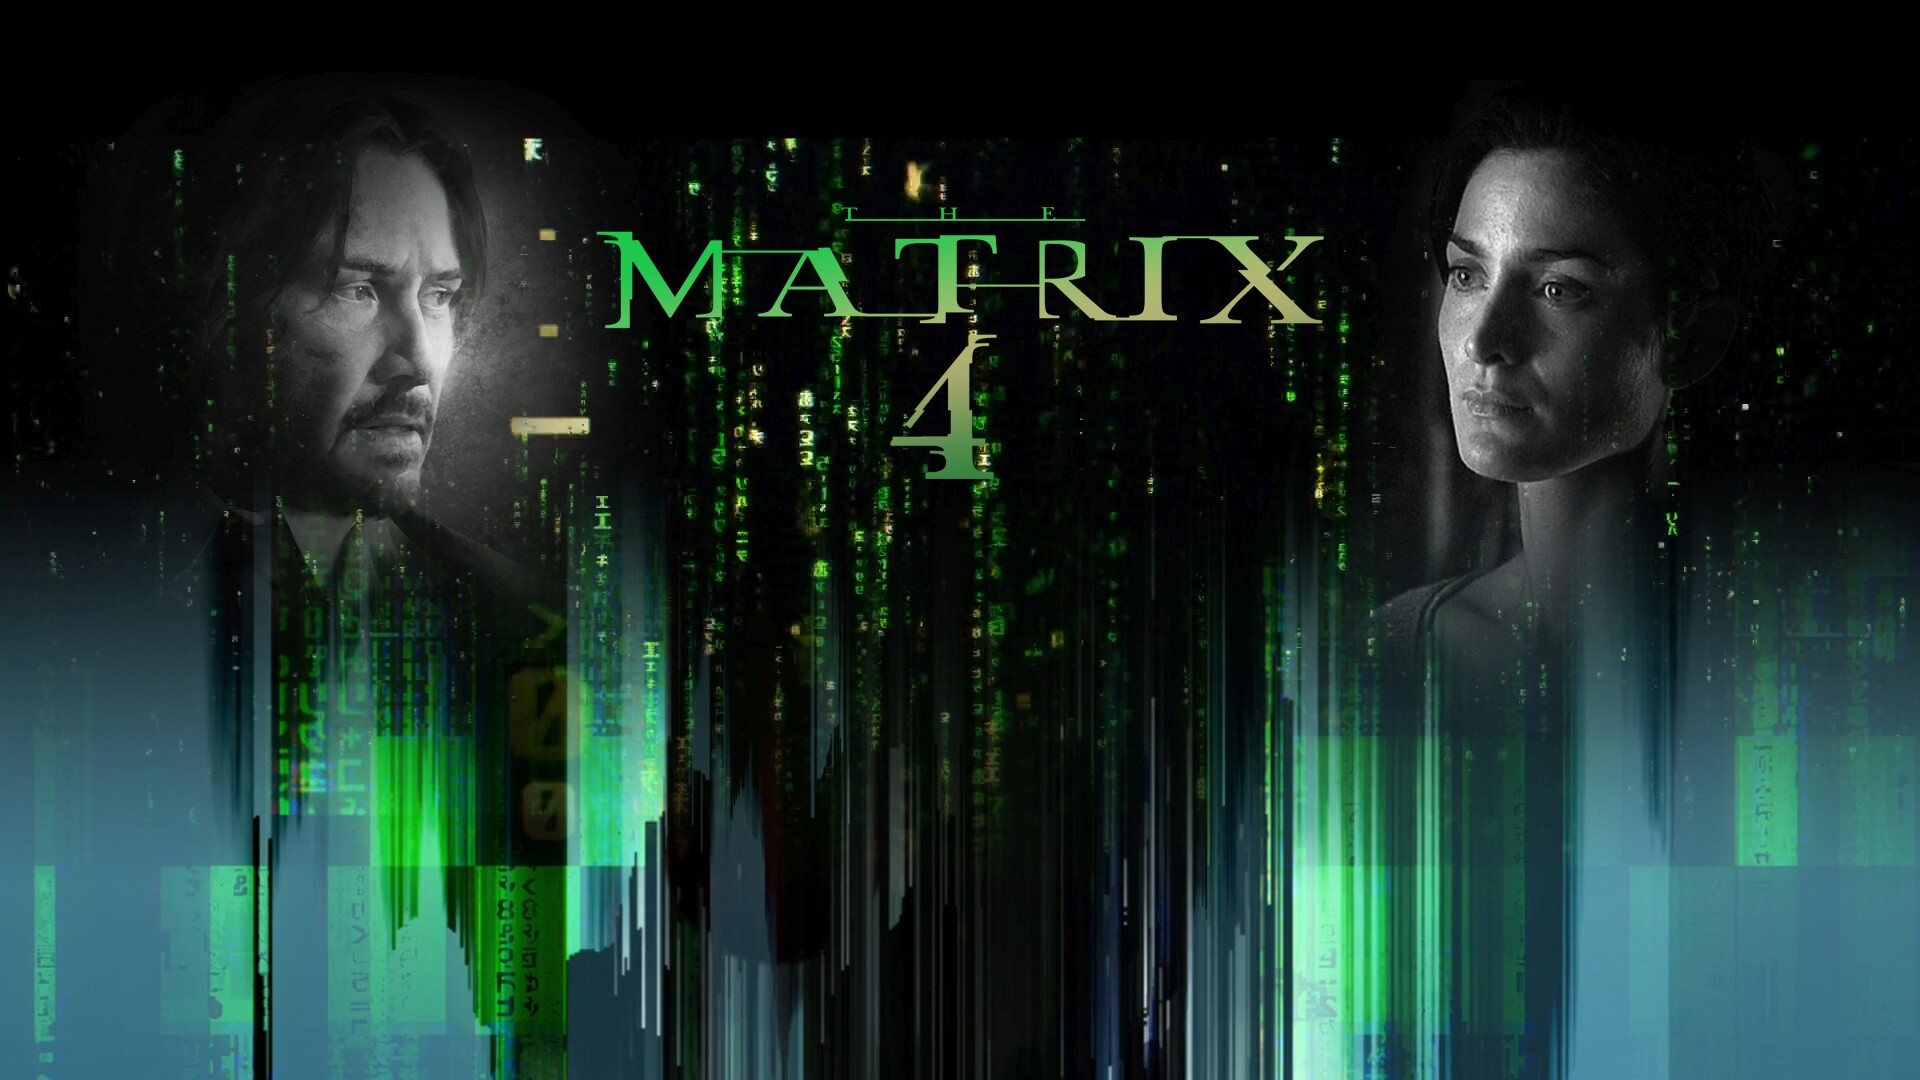 Matrix Franchise: Thomas Anderson, The creator of a video game series, based on his faint memories as Neo. 1920x1080 Full HD Background.